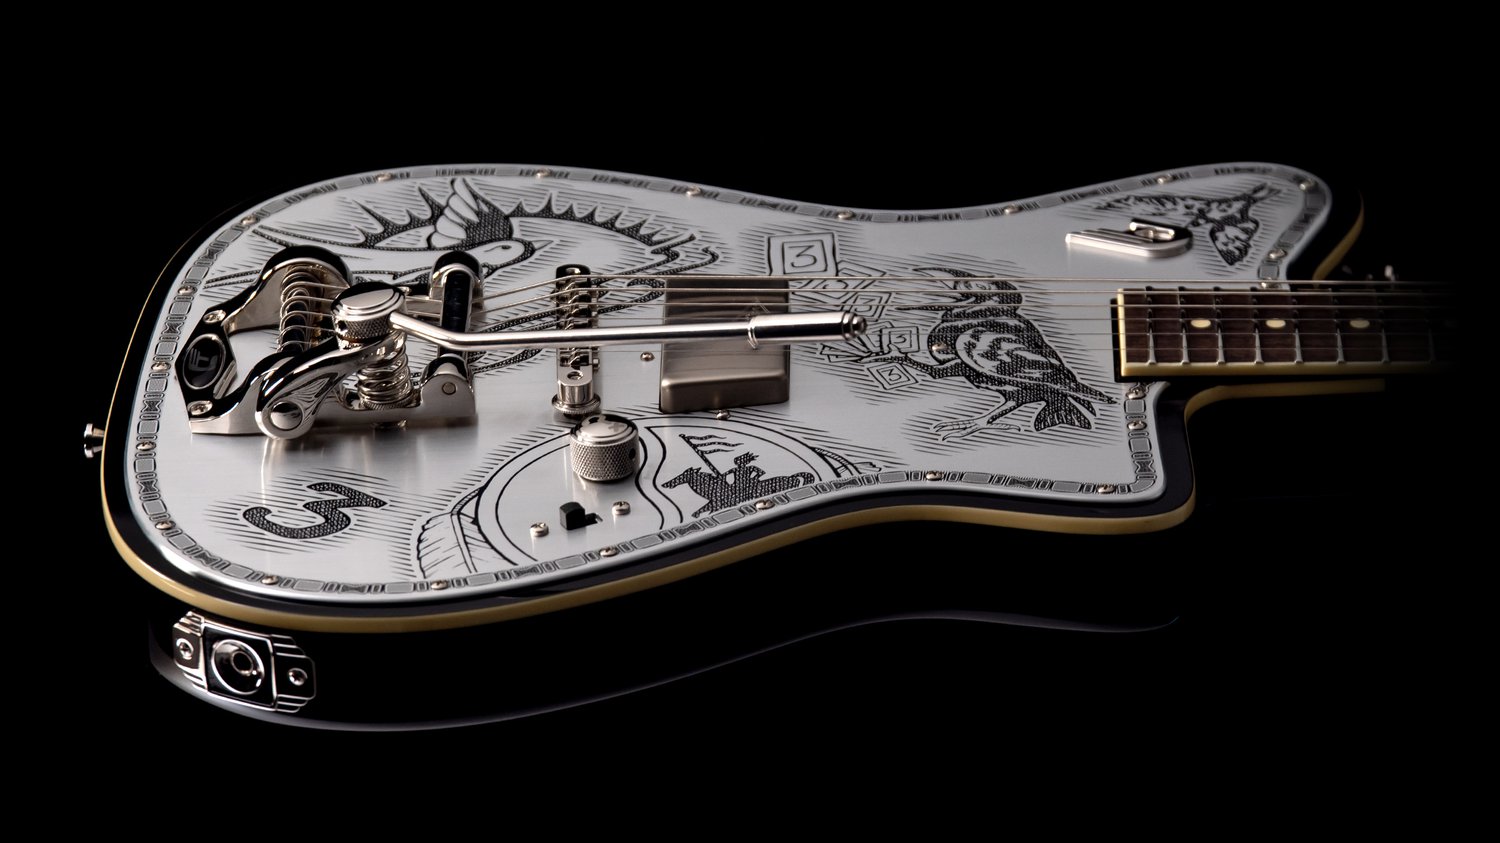 Angled view of the Duesenberg Alliance Series Johnny Depp